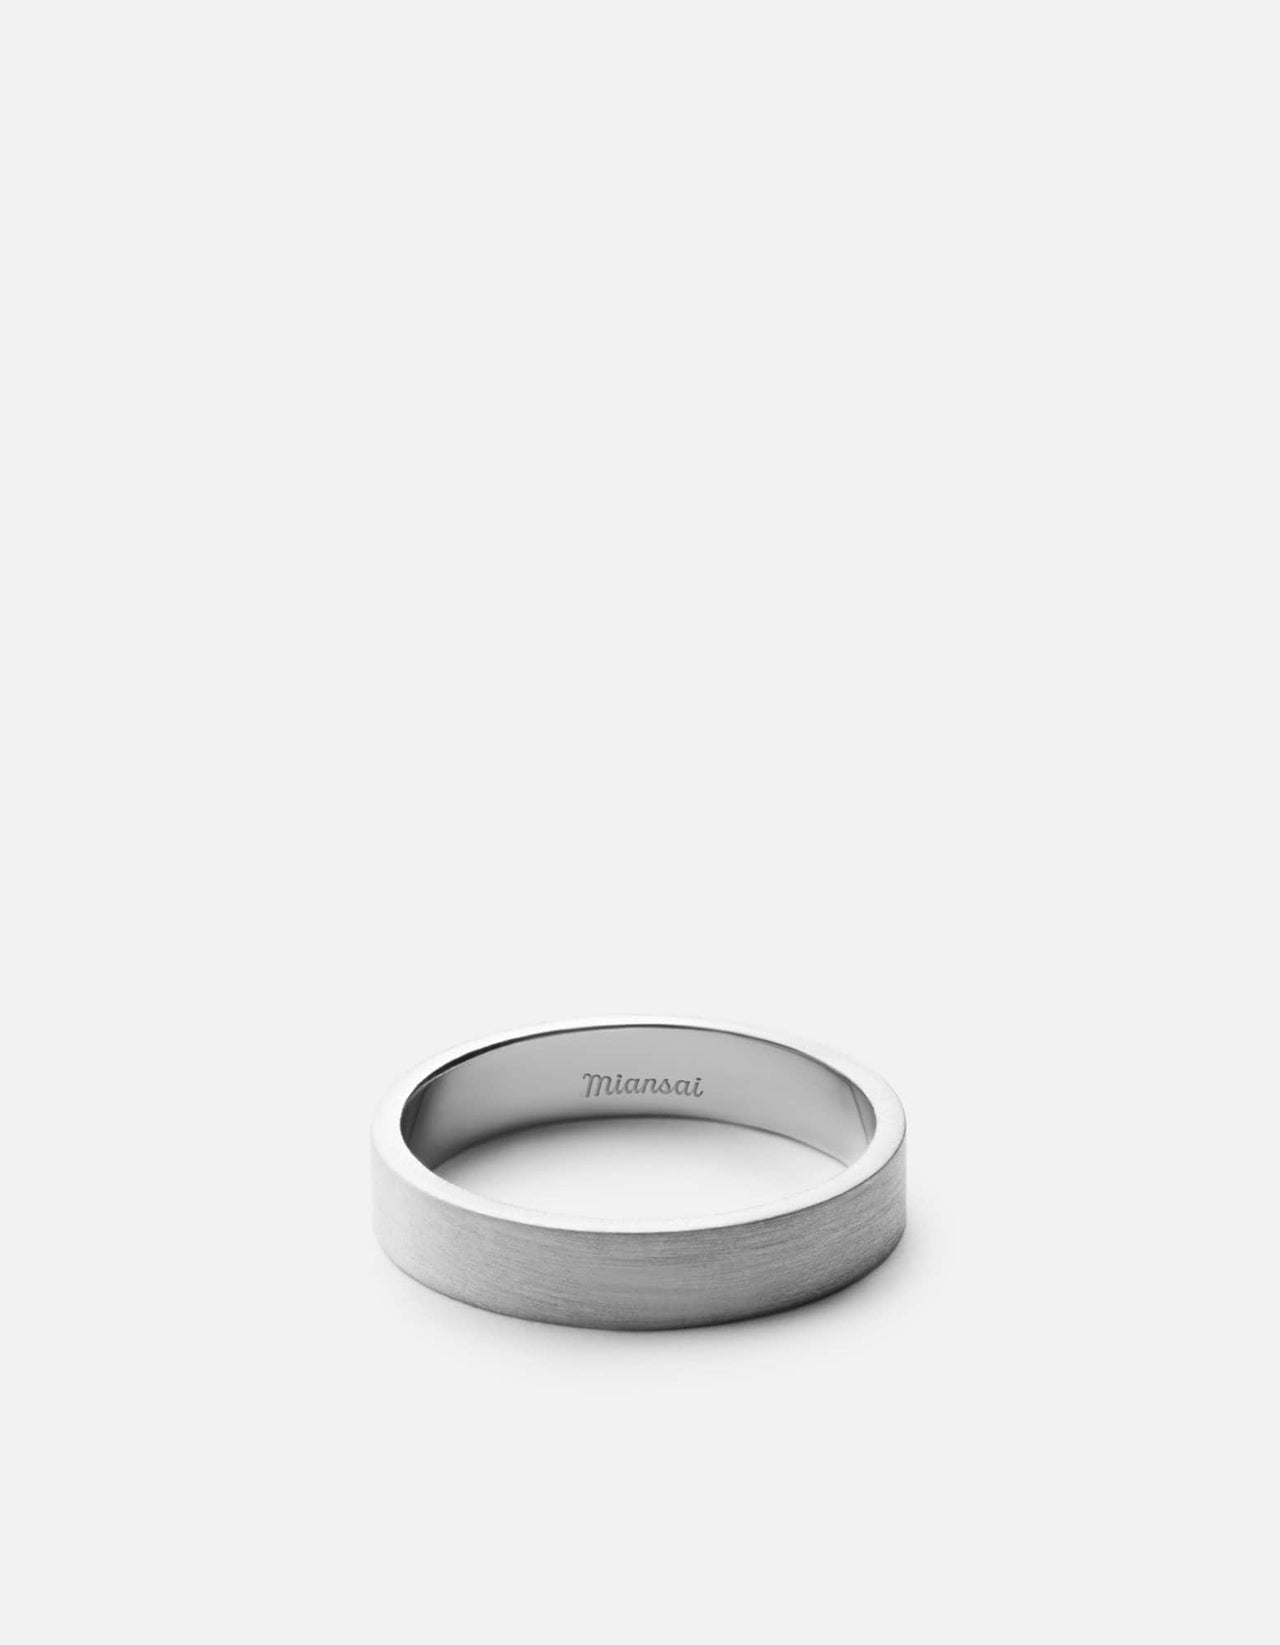 Buy 6MM Sterling Silver Plain Flat Band Ring - Size 6 at Amazon.in